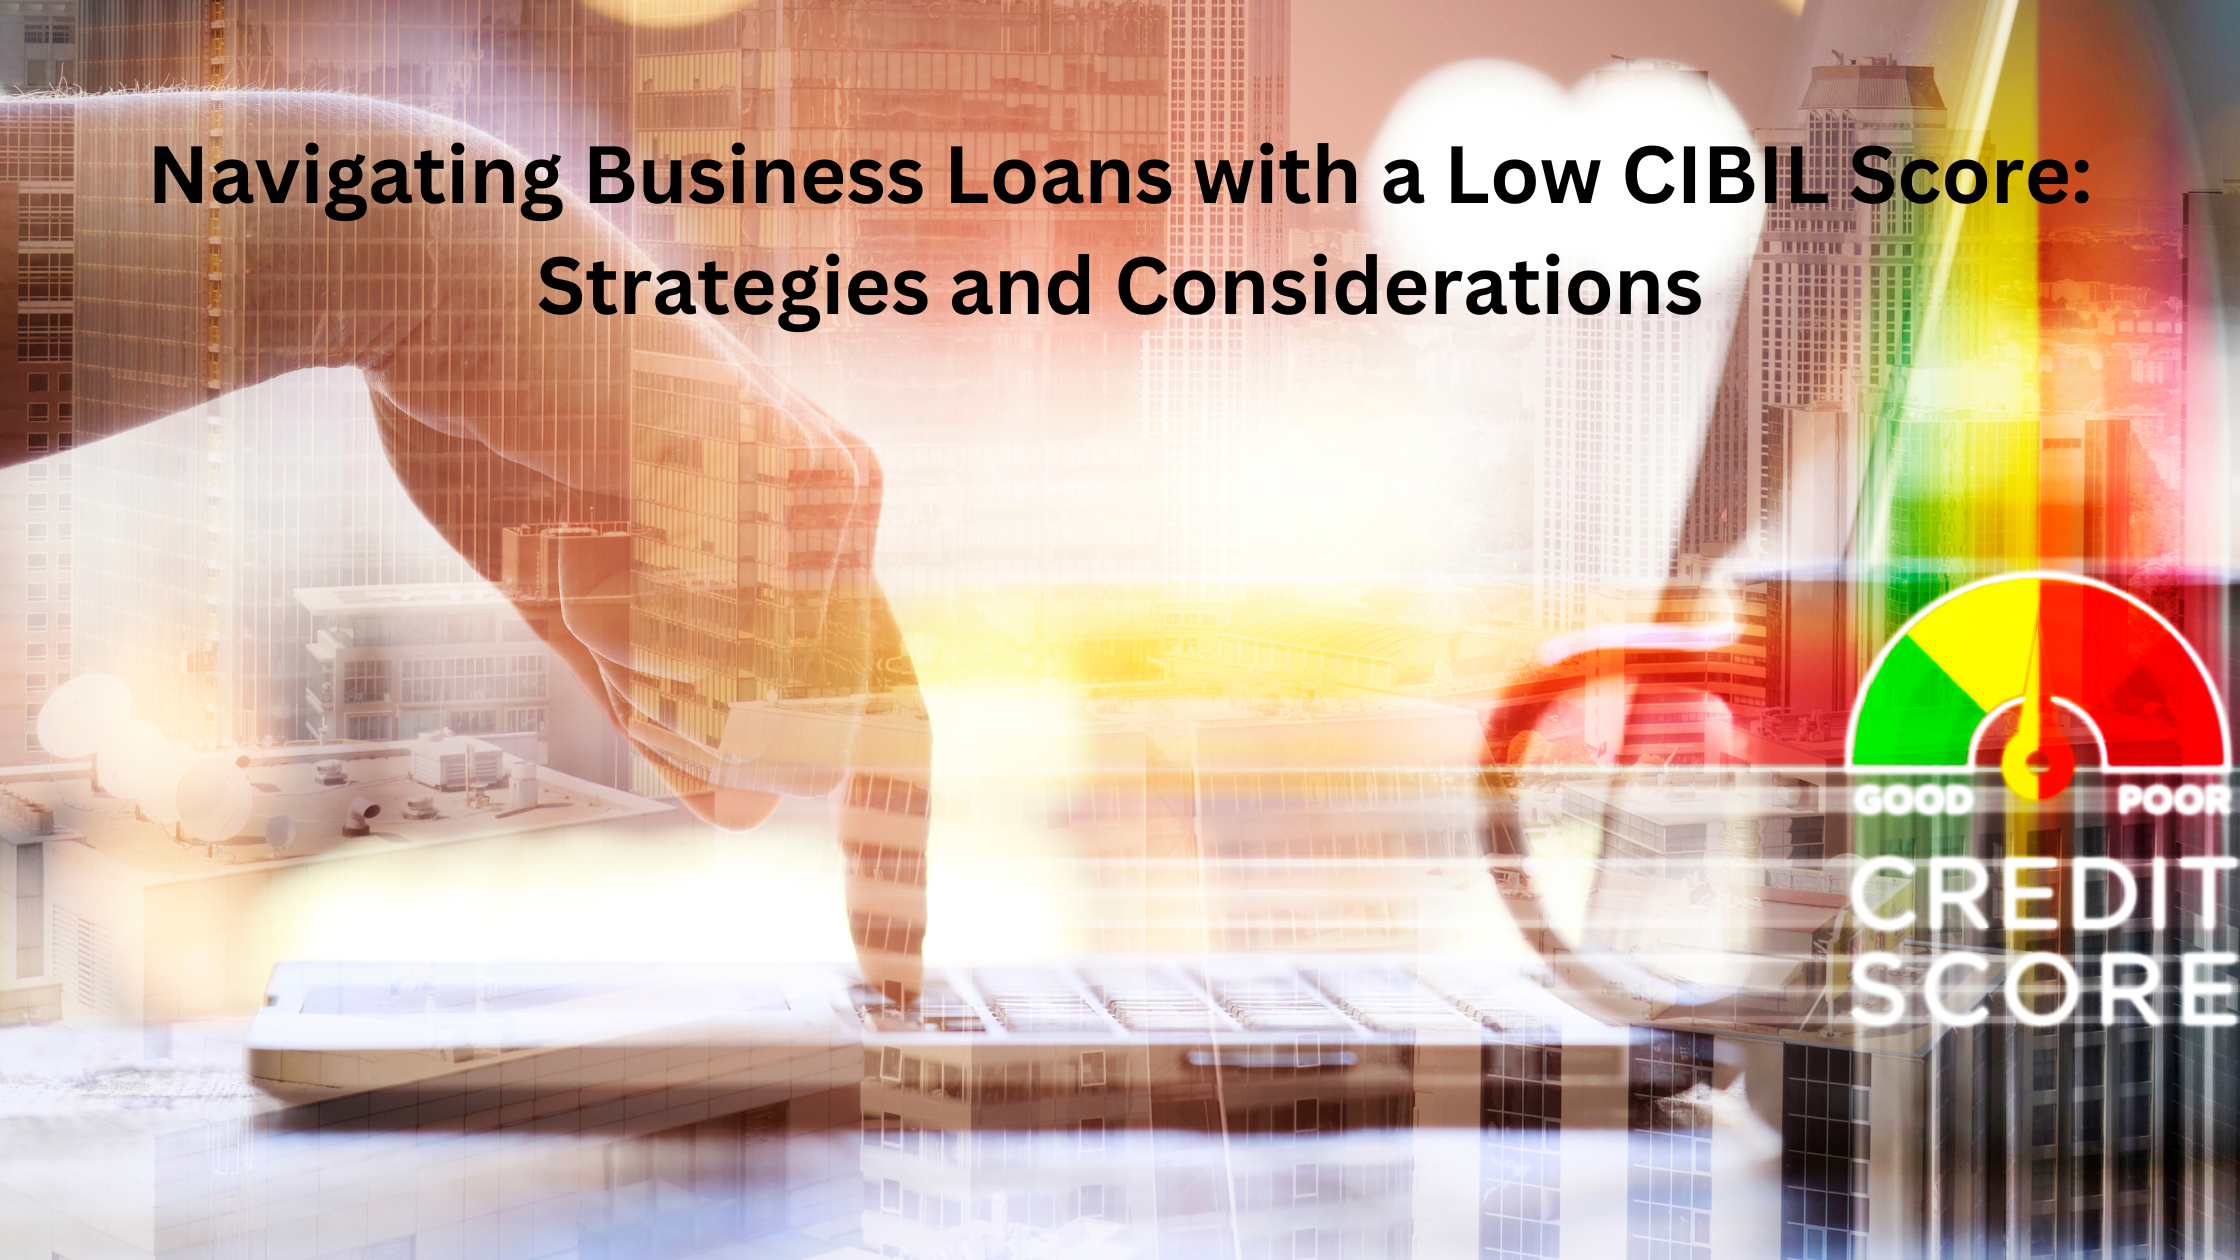 Navigating Business Loans with a Low CIBIL Score: Strategies and Considerations